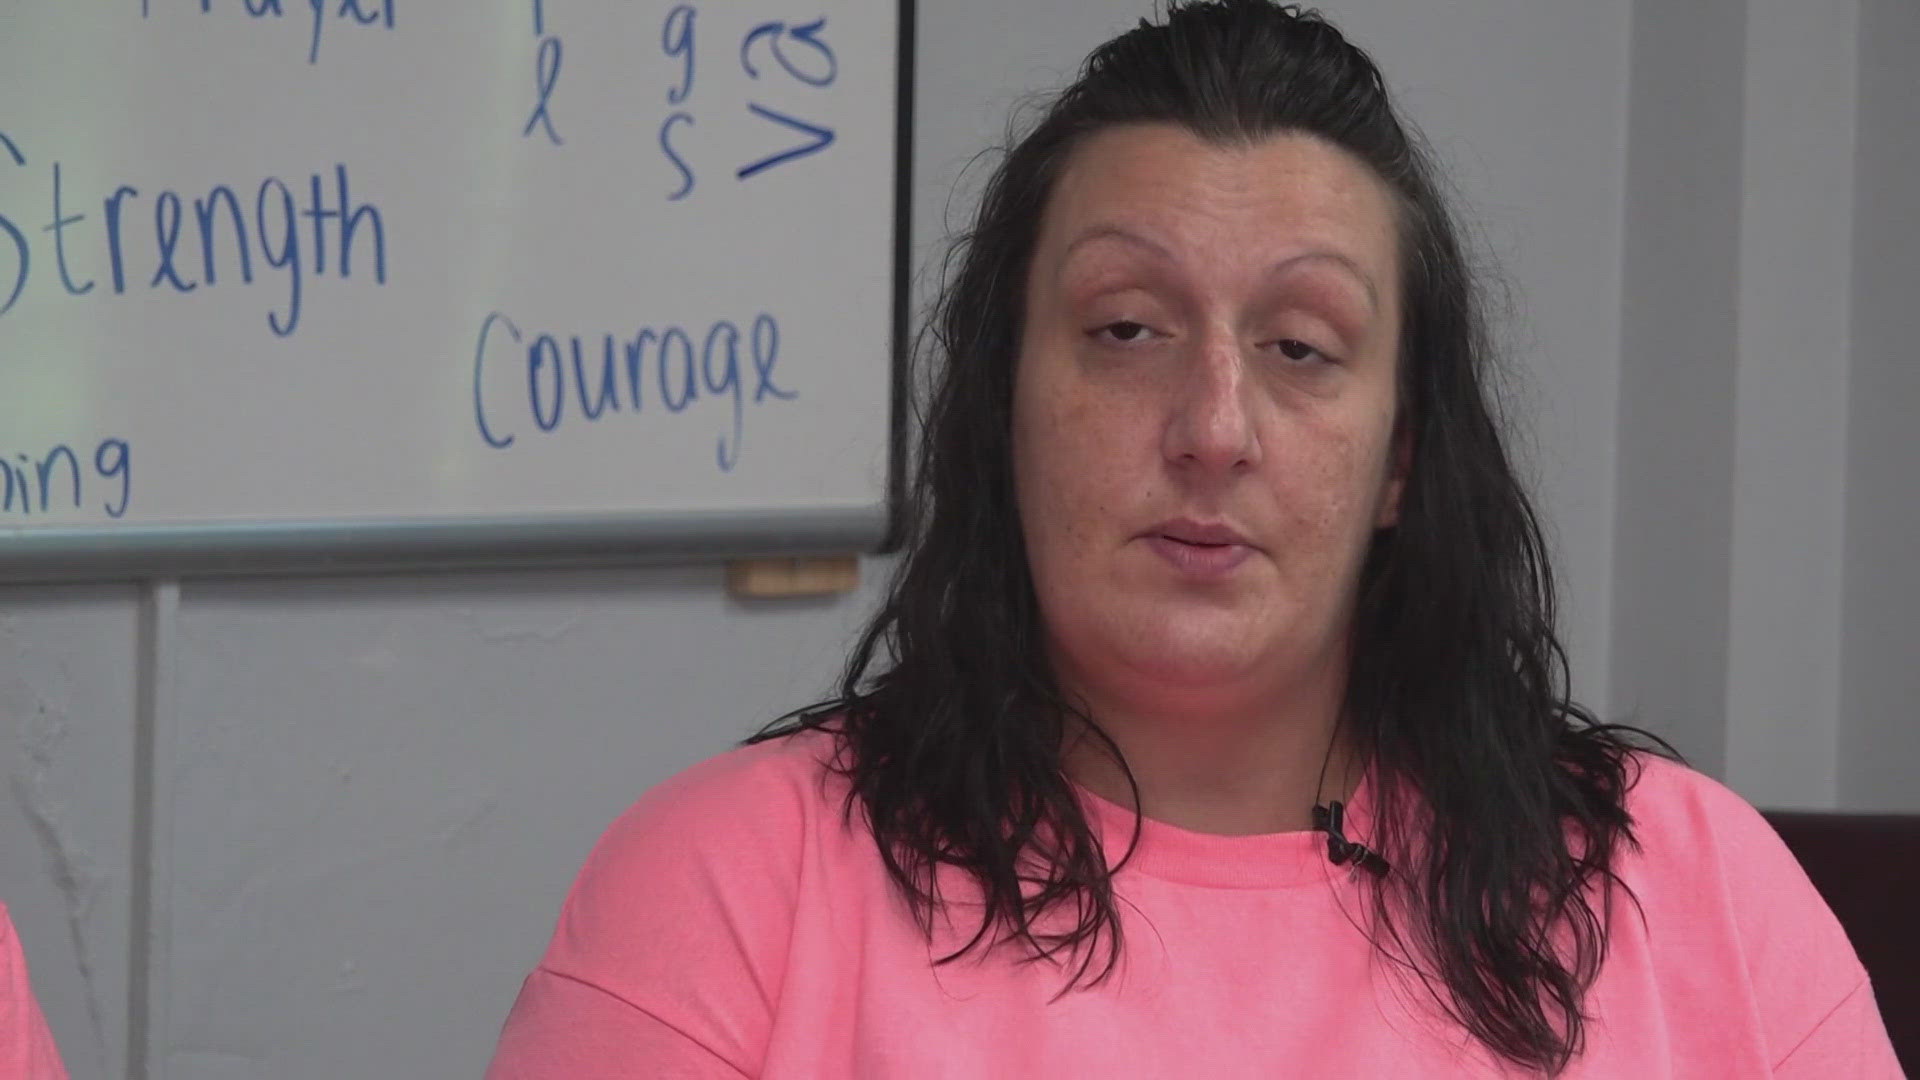 A program in Cocke County is helping women break addiction while in jail.